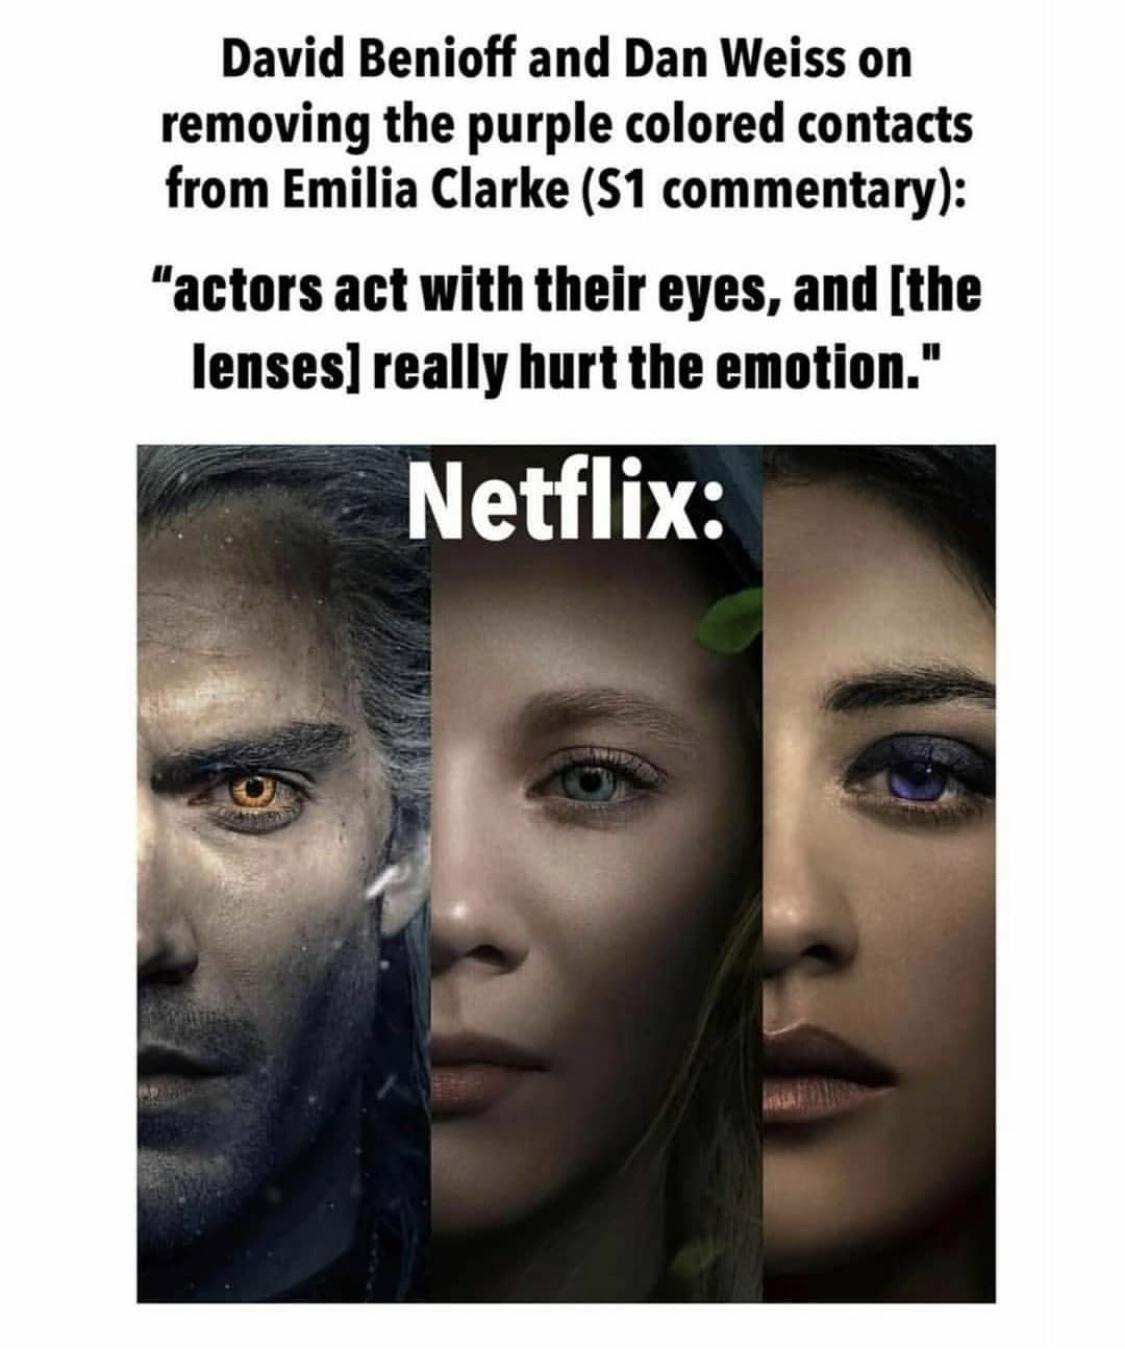 human - David Benioff and Dan Weiss on removing the purple colored contacts from Emilia Clarke S1 commentary "actors act with their eyes, and the lenses really hurt the emotion." Netflix